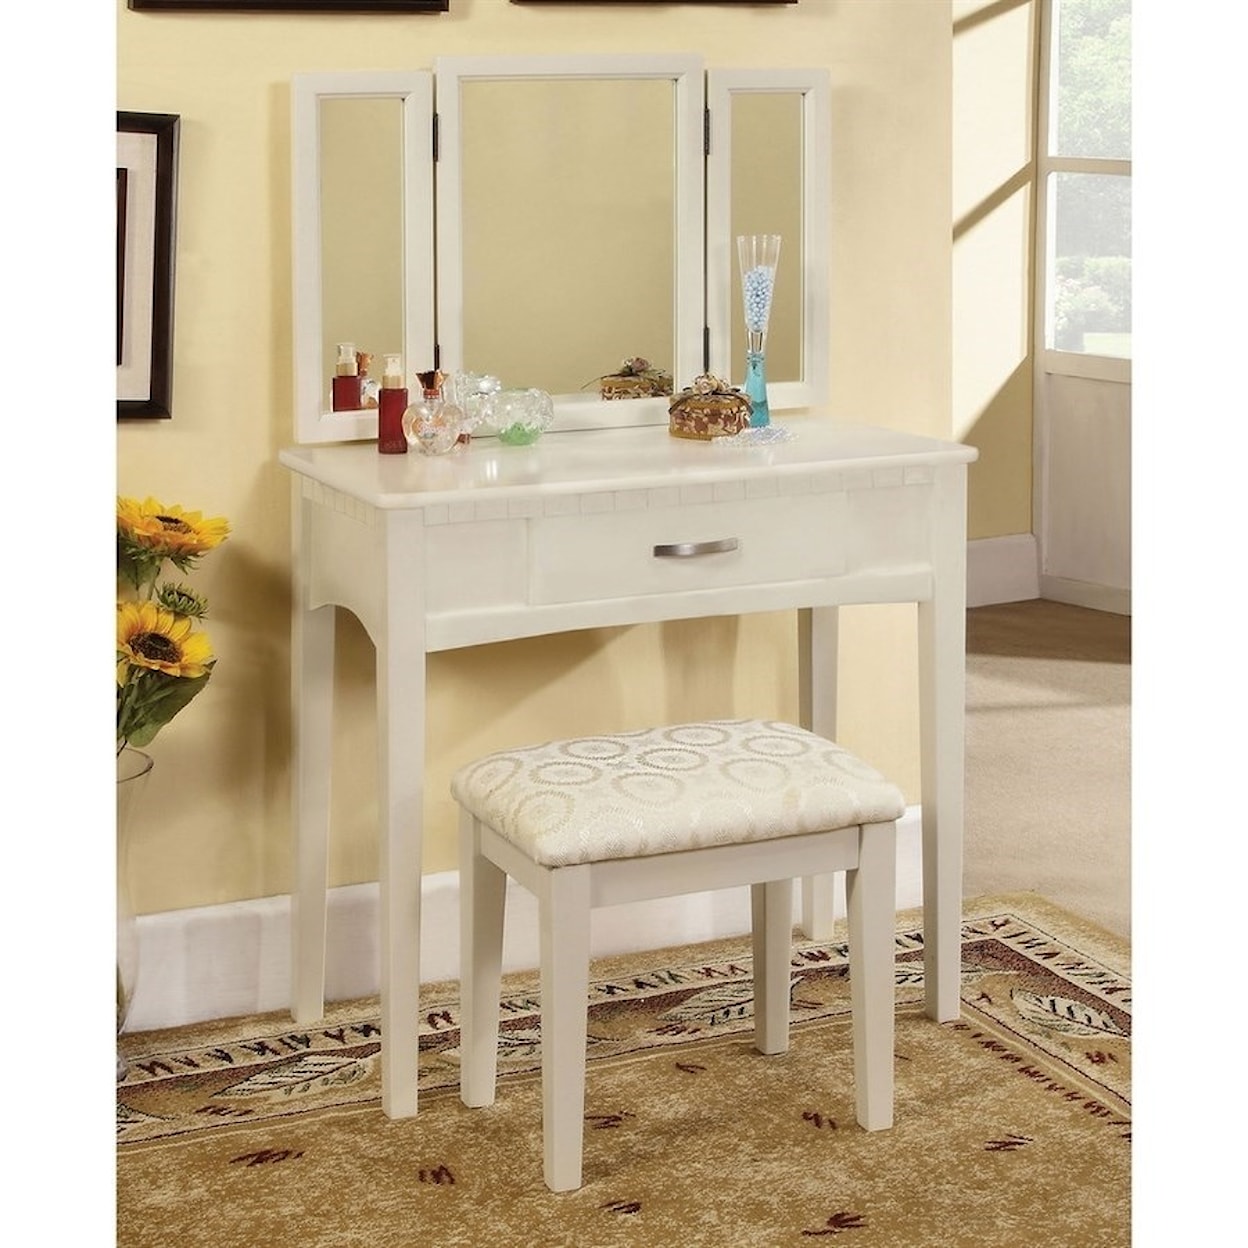 Furniture of America Potterville Vanity Table with Stool